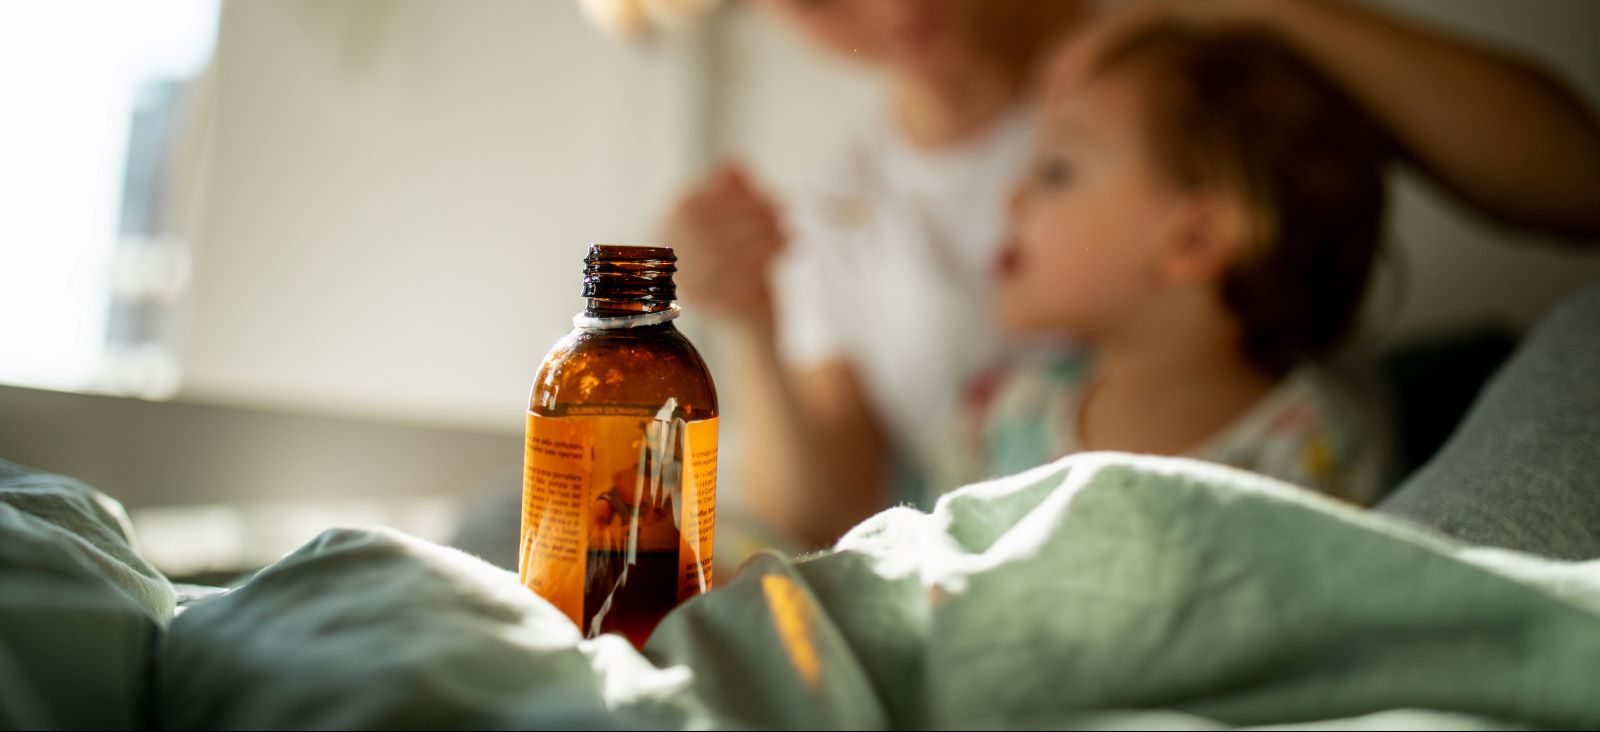 During a national shortage, keep these four tips from an expert in mind when looking for medicine for your sick child.